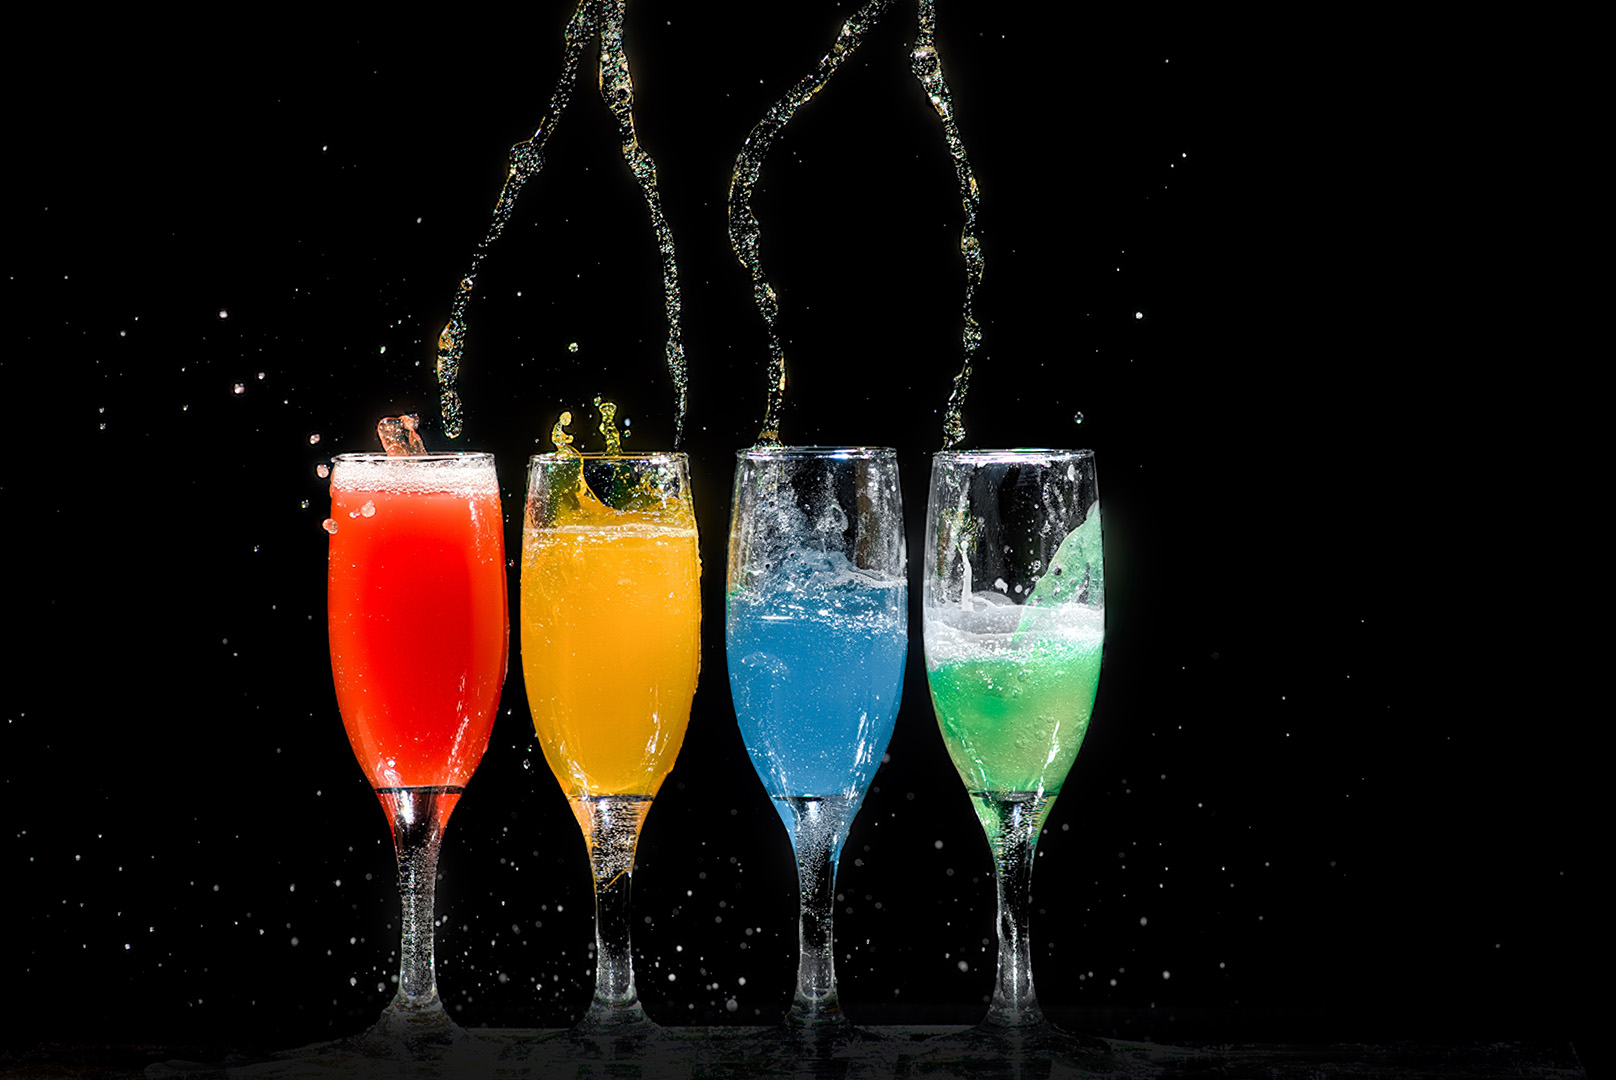 Long stem alcohol glasses sit in front of a black background with bright colored drinks inside